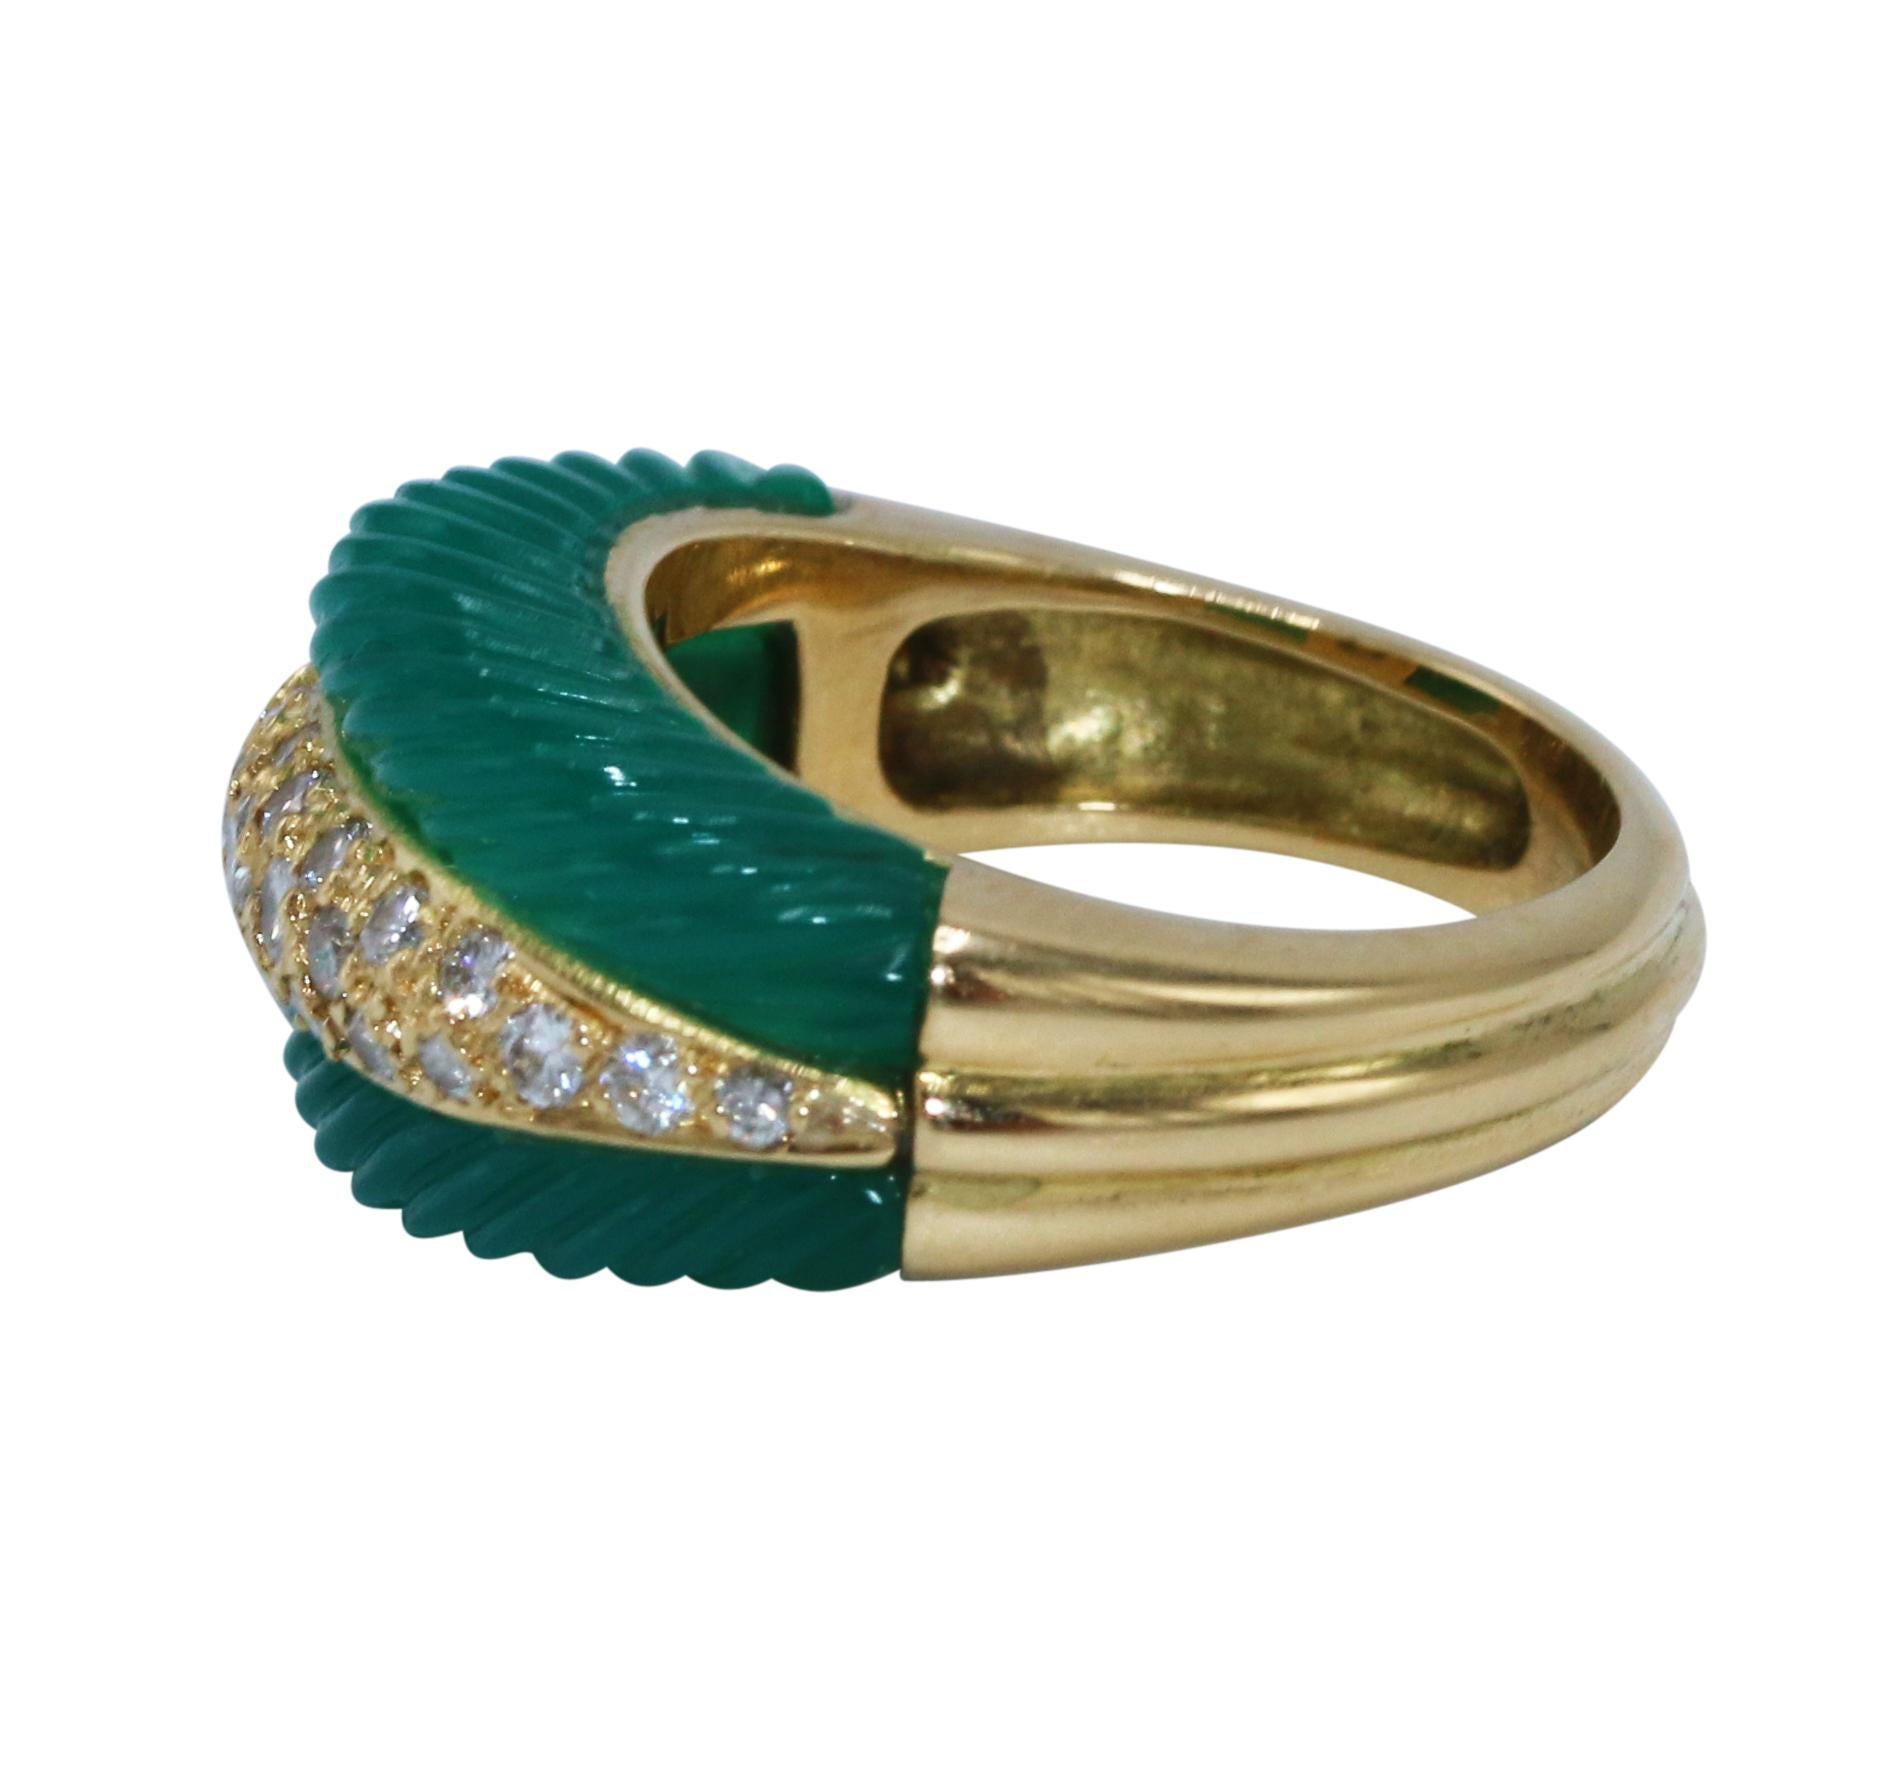 18 karat yellow gold, chrysophrase and diamond cocktail ring, of tapered design set down the center with round diamonds weighing approximately 0.50 carat, flanked by sections of fluted chrysophrase, gross weight 9.0 grams, size 5 1/2, with workshop